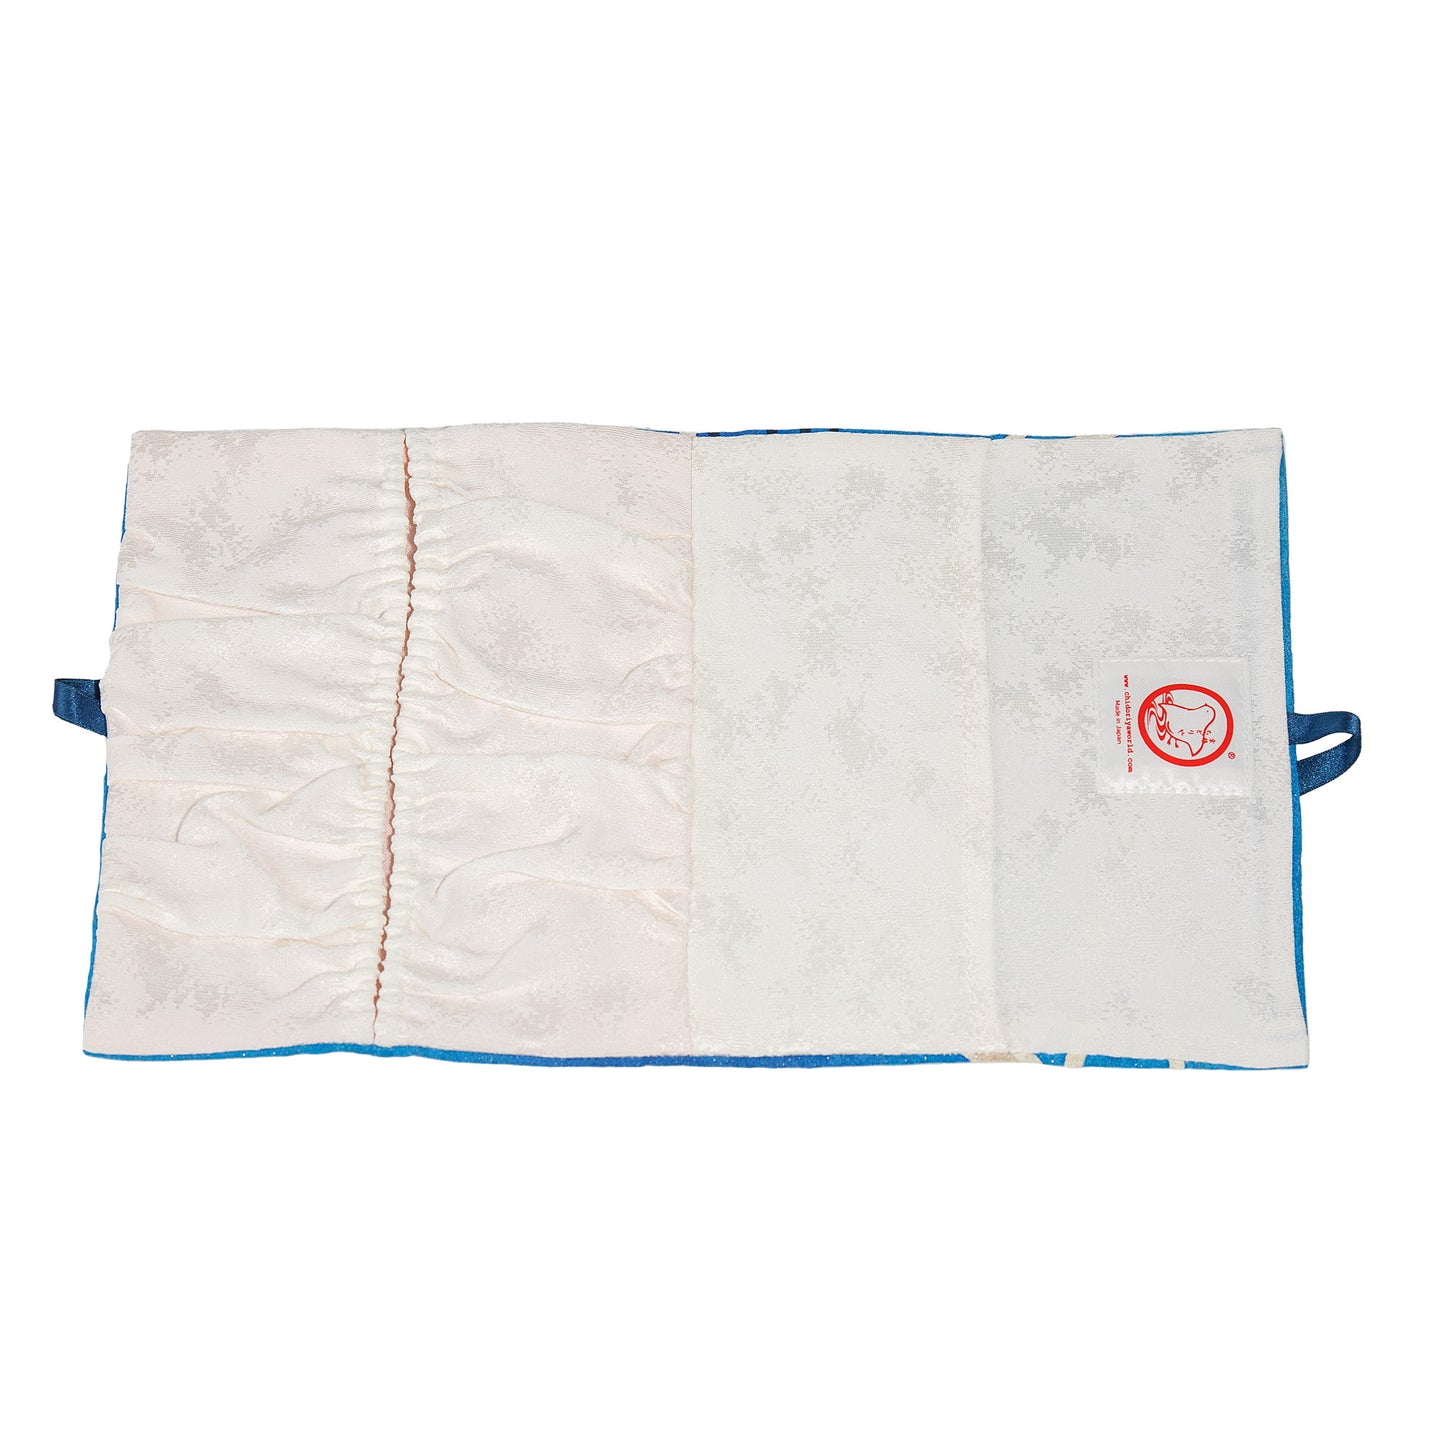 Secondary image of Chidoriya Small Lingerie Pouch - Blue Open